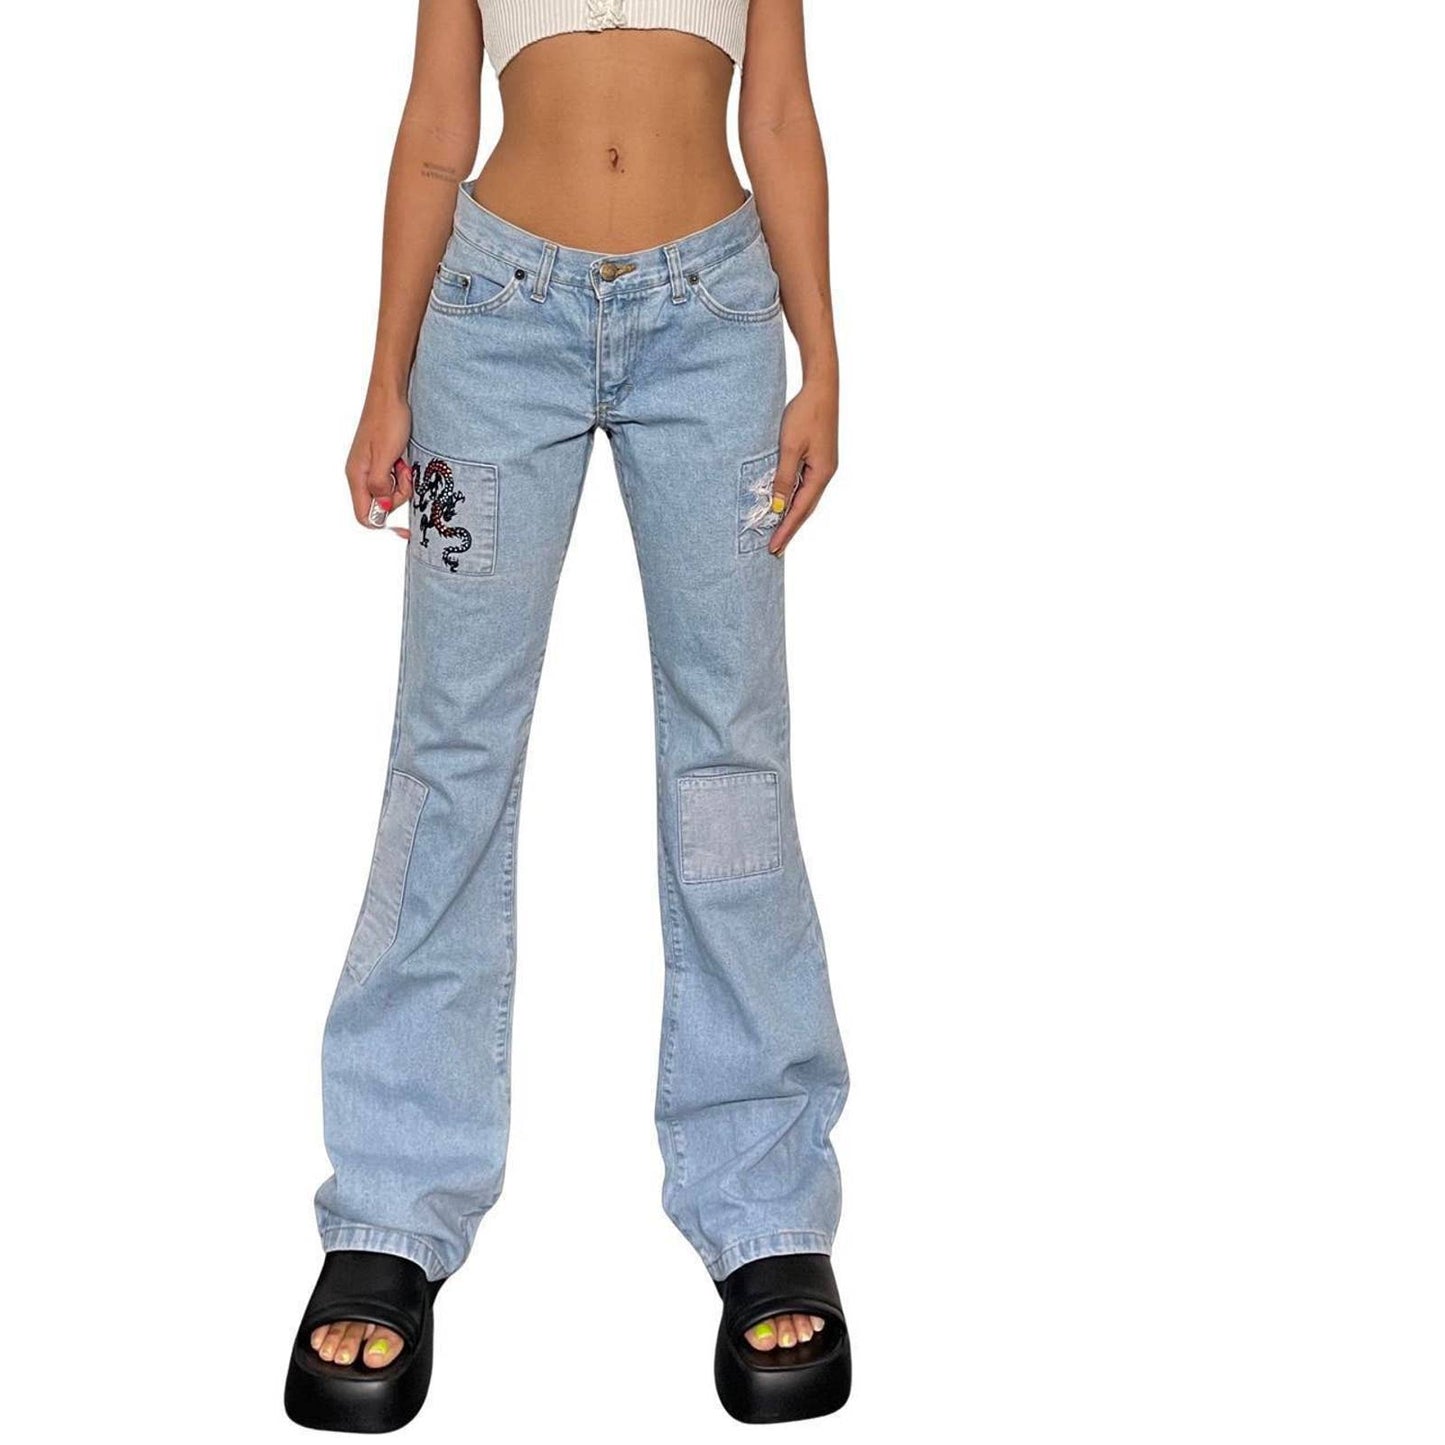 Vintage 2000s Mid Rise Flare Jeans (S)